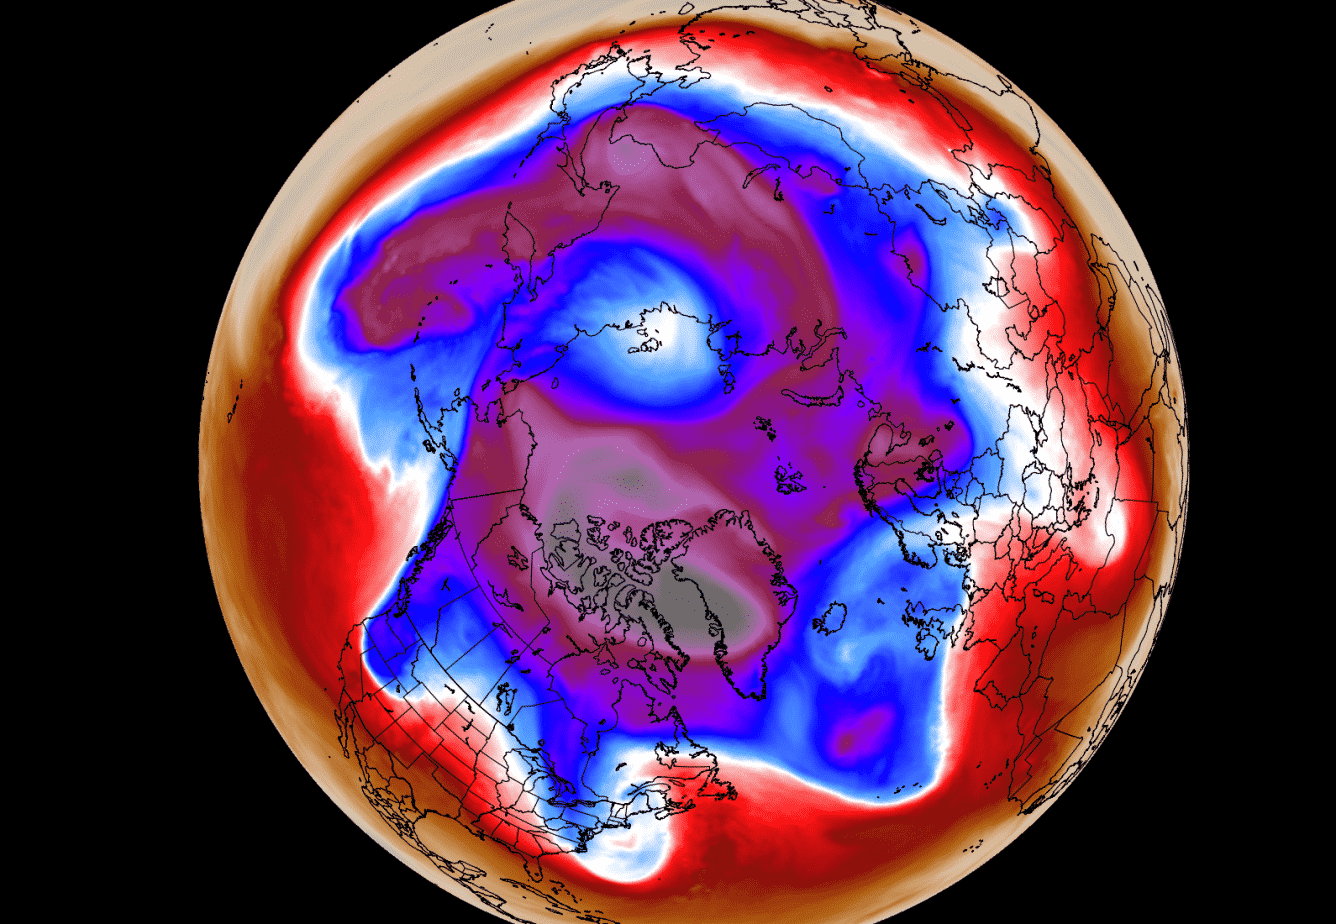 polar-vortex-spring-season-united-states-surface-cold-weather-temperature-pattern-anomaly